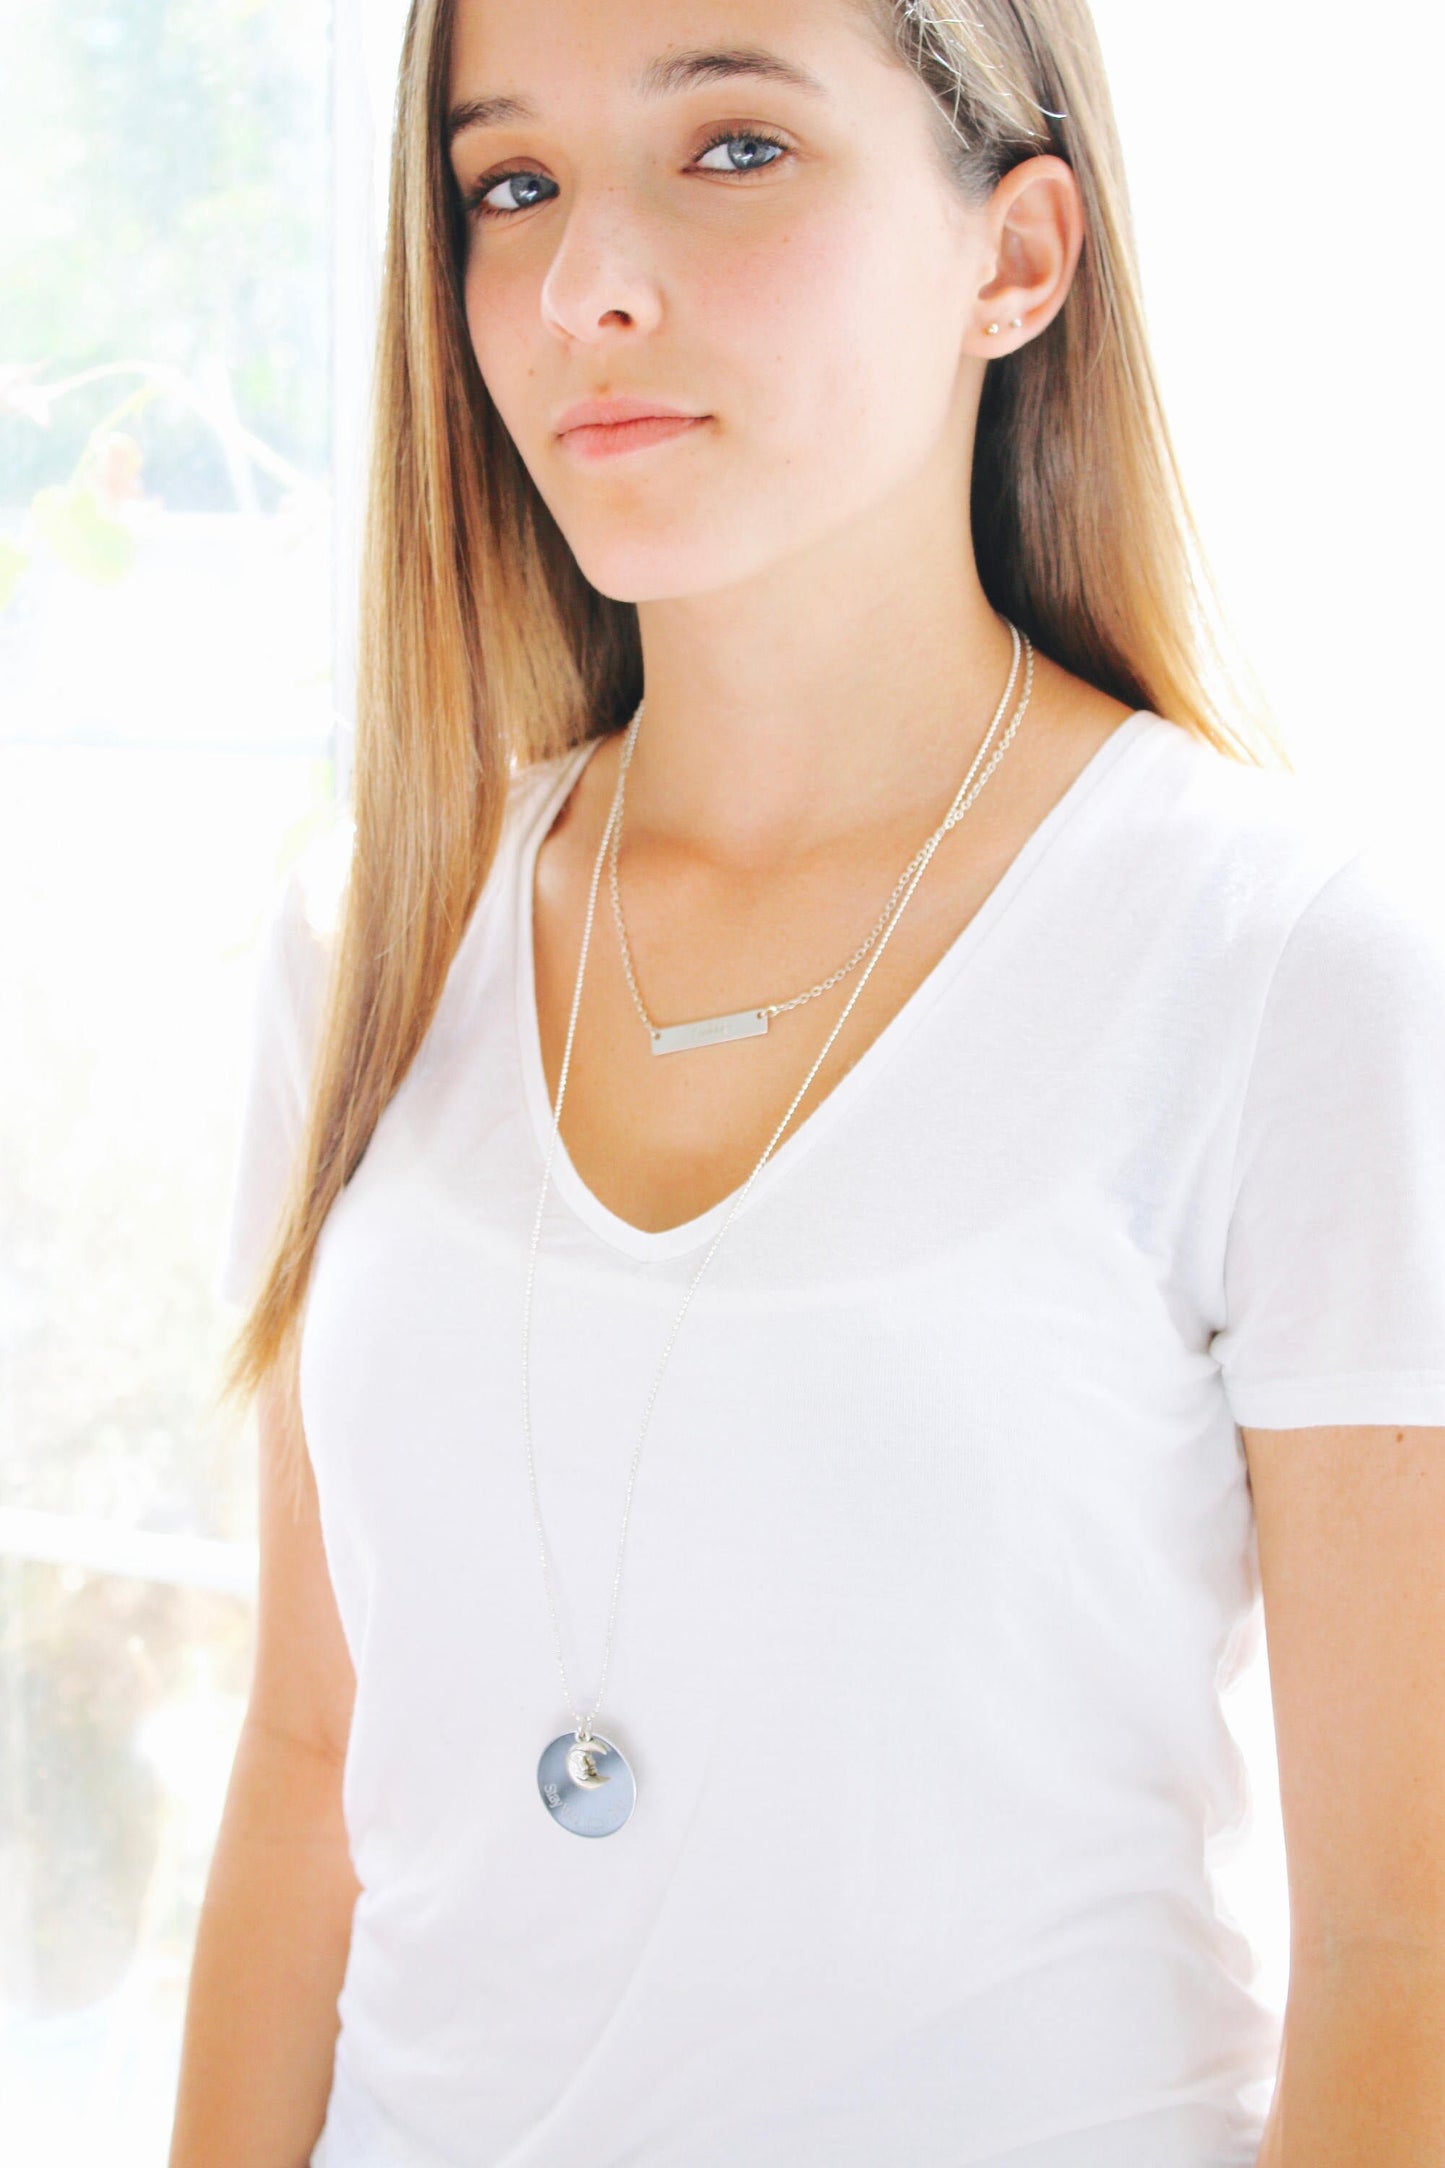 selenophile necklace, Moon necklace, Stay Wild Moon Child, Silver crescent moon pendant